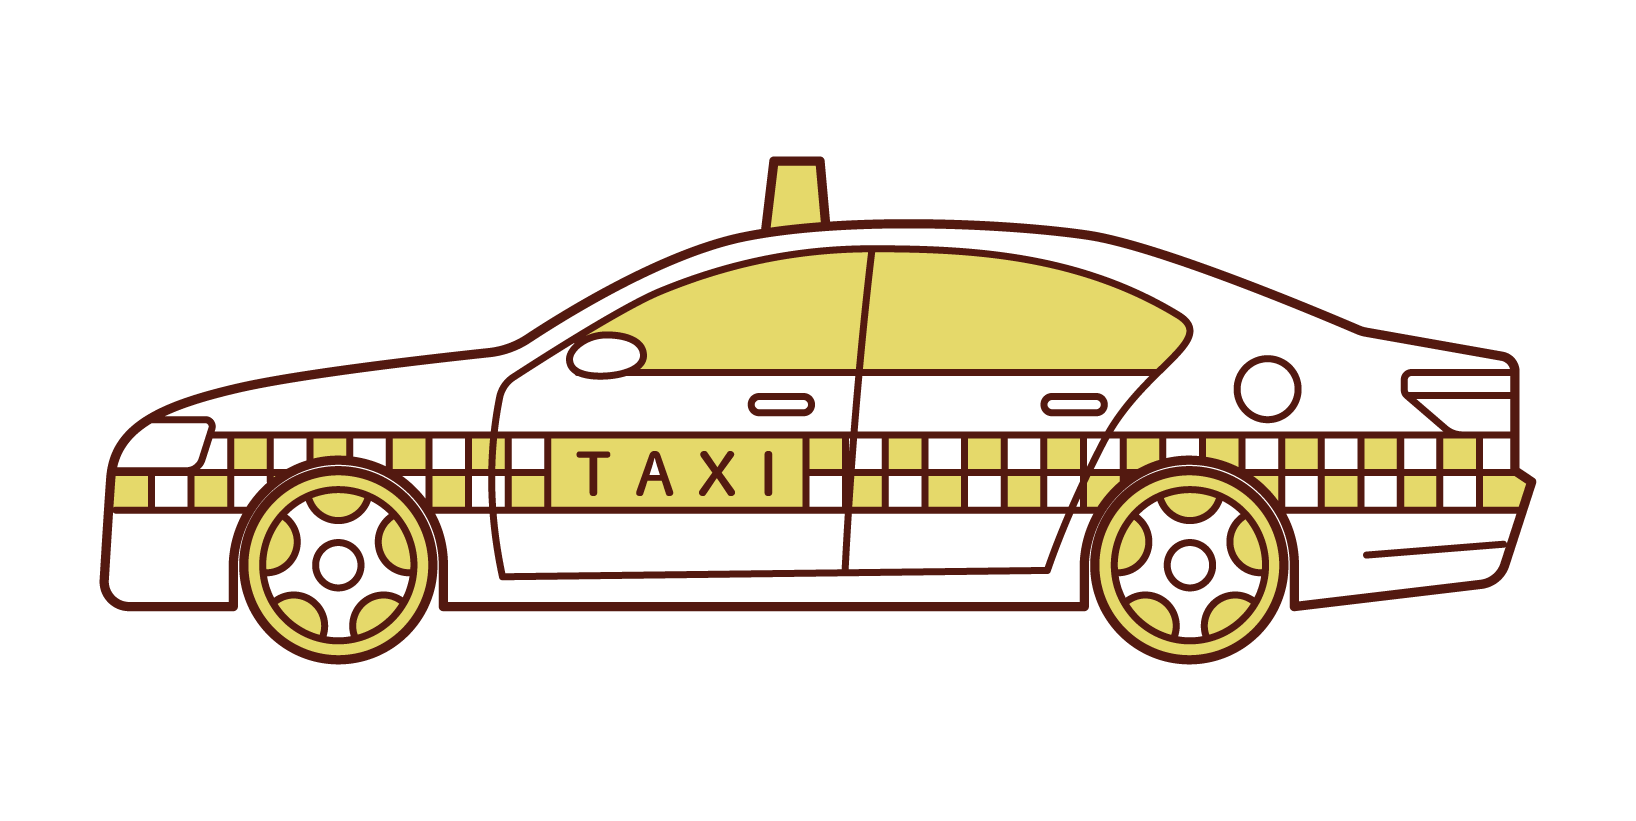 Illustration of a taxi seen from the side